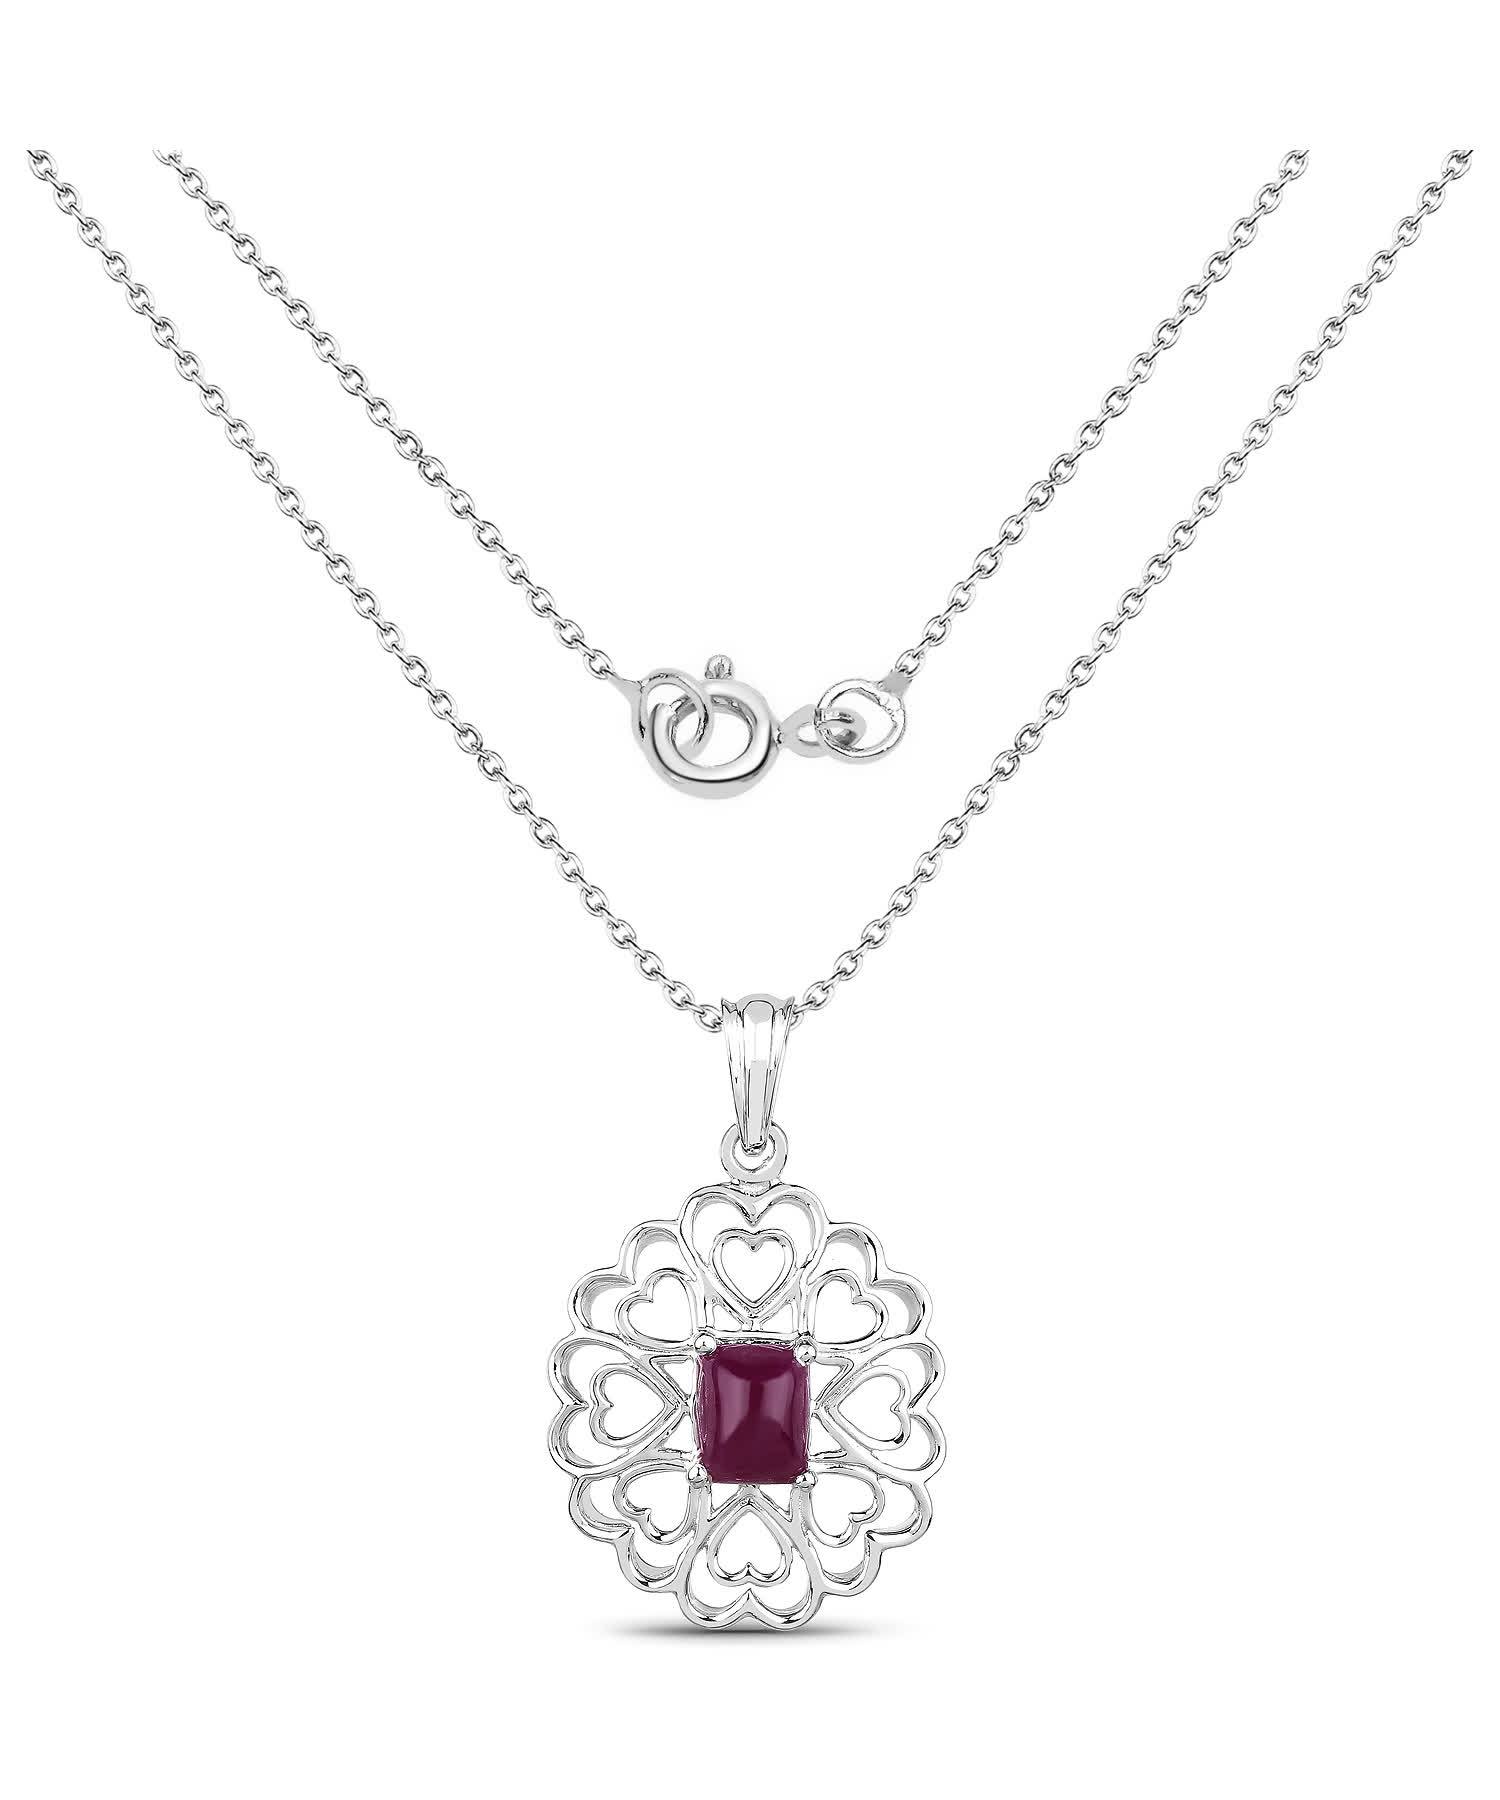 3.48ctw Natural Ruby Rhodium Plated 925 Sterling Silver Heart Pendant With Chain View 2